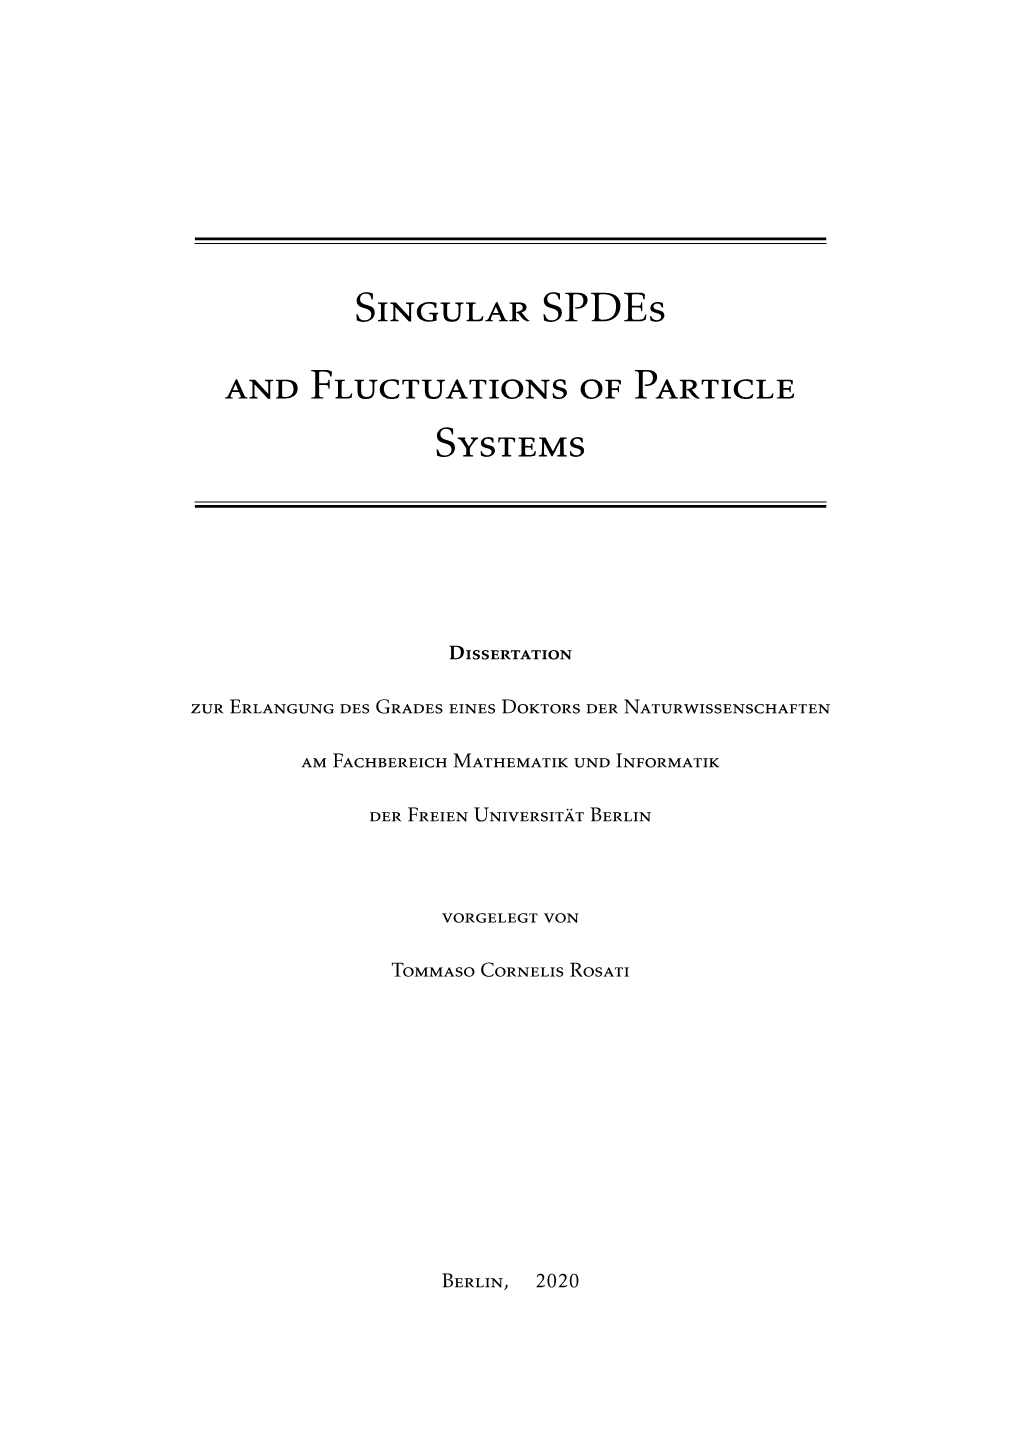 Singular Spdes and Fluctuations of Particle Systems